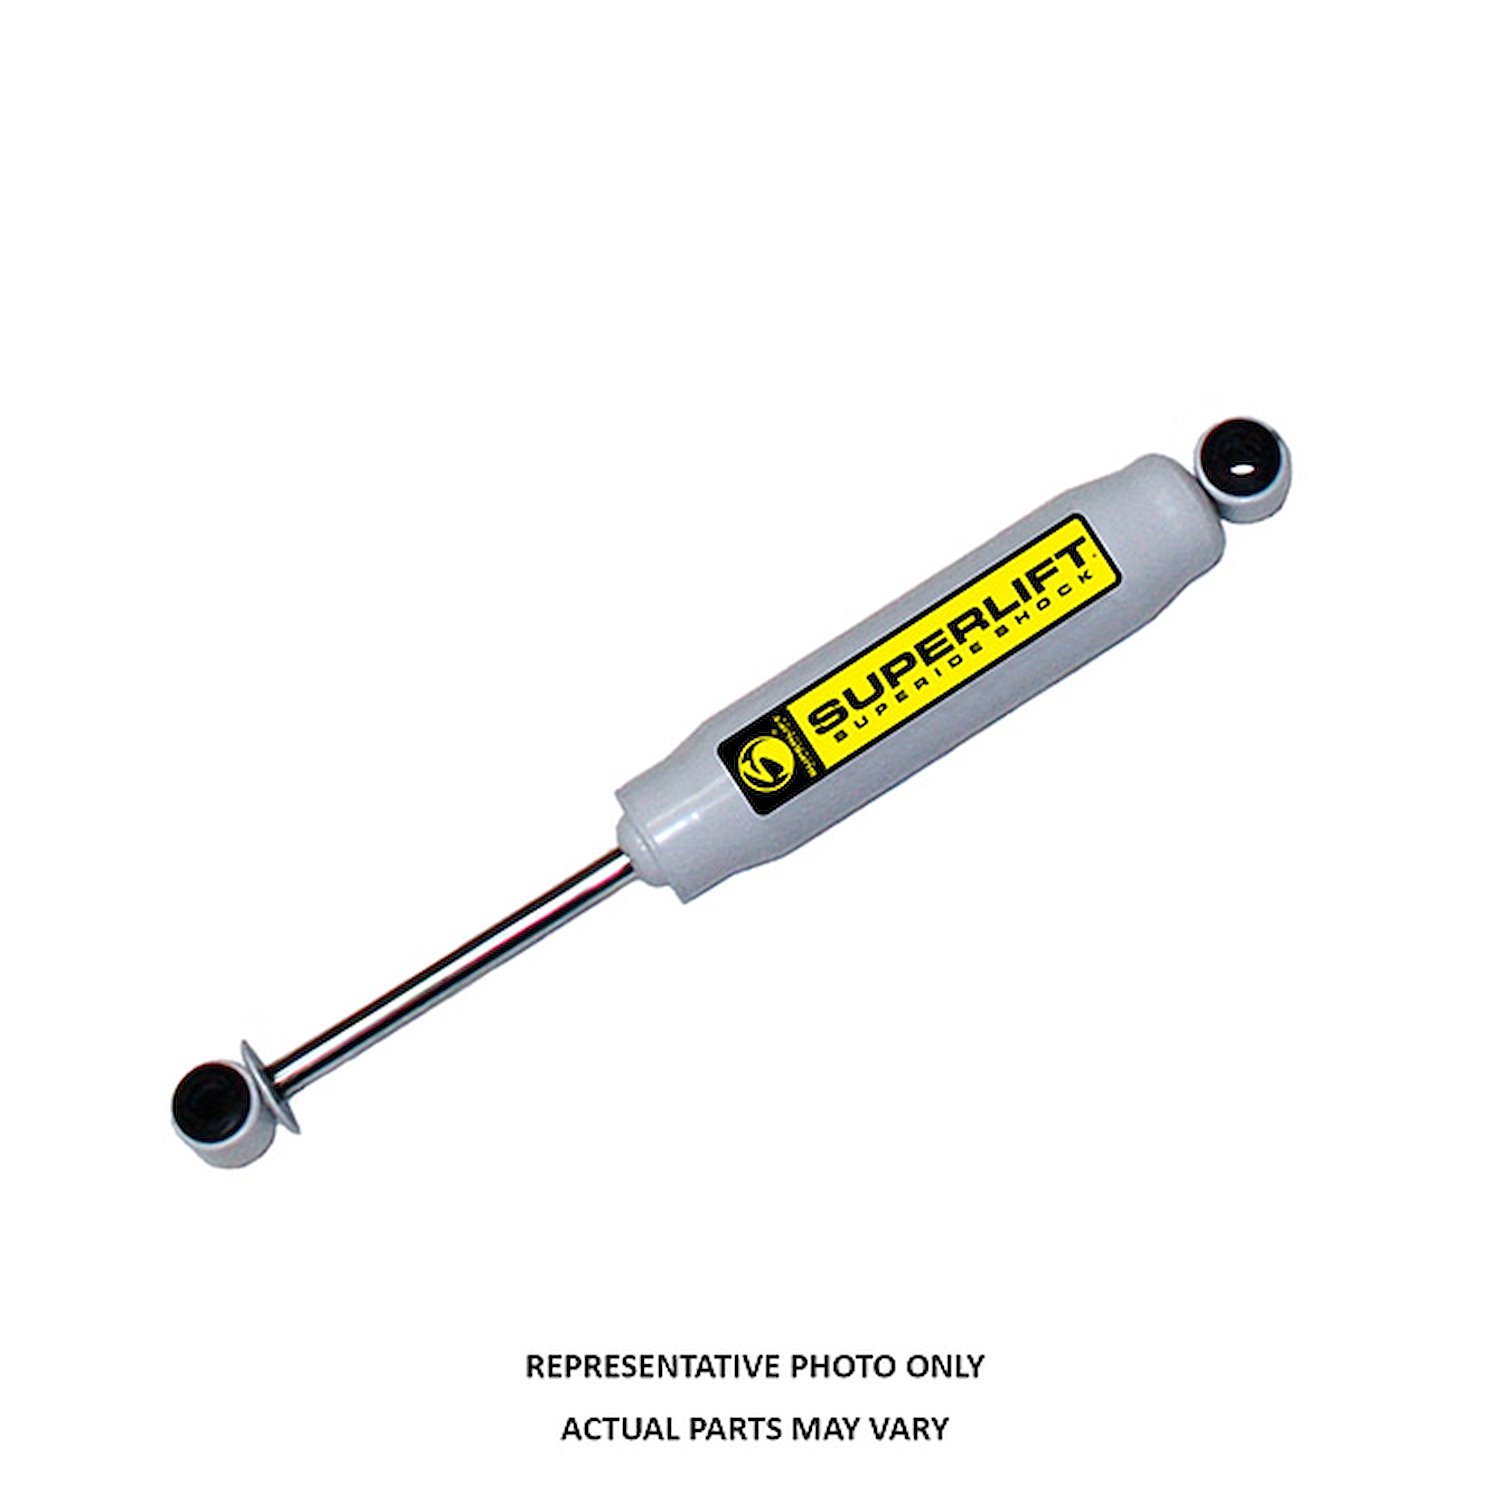 Replacement Steering Stabilizer 1994-2001 Dodge Ram 1500 4WD